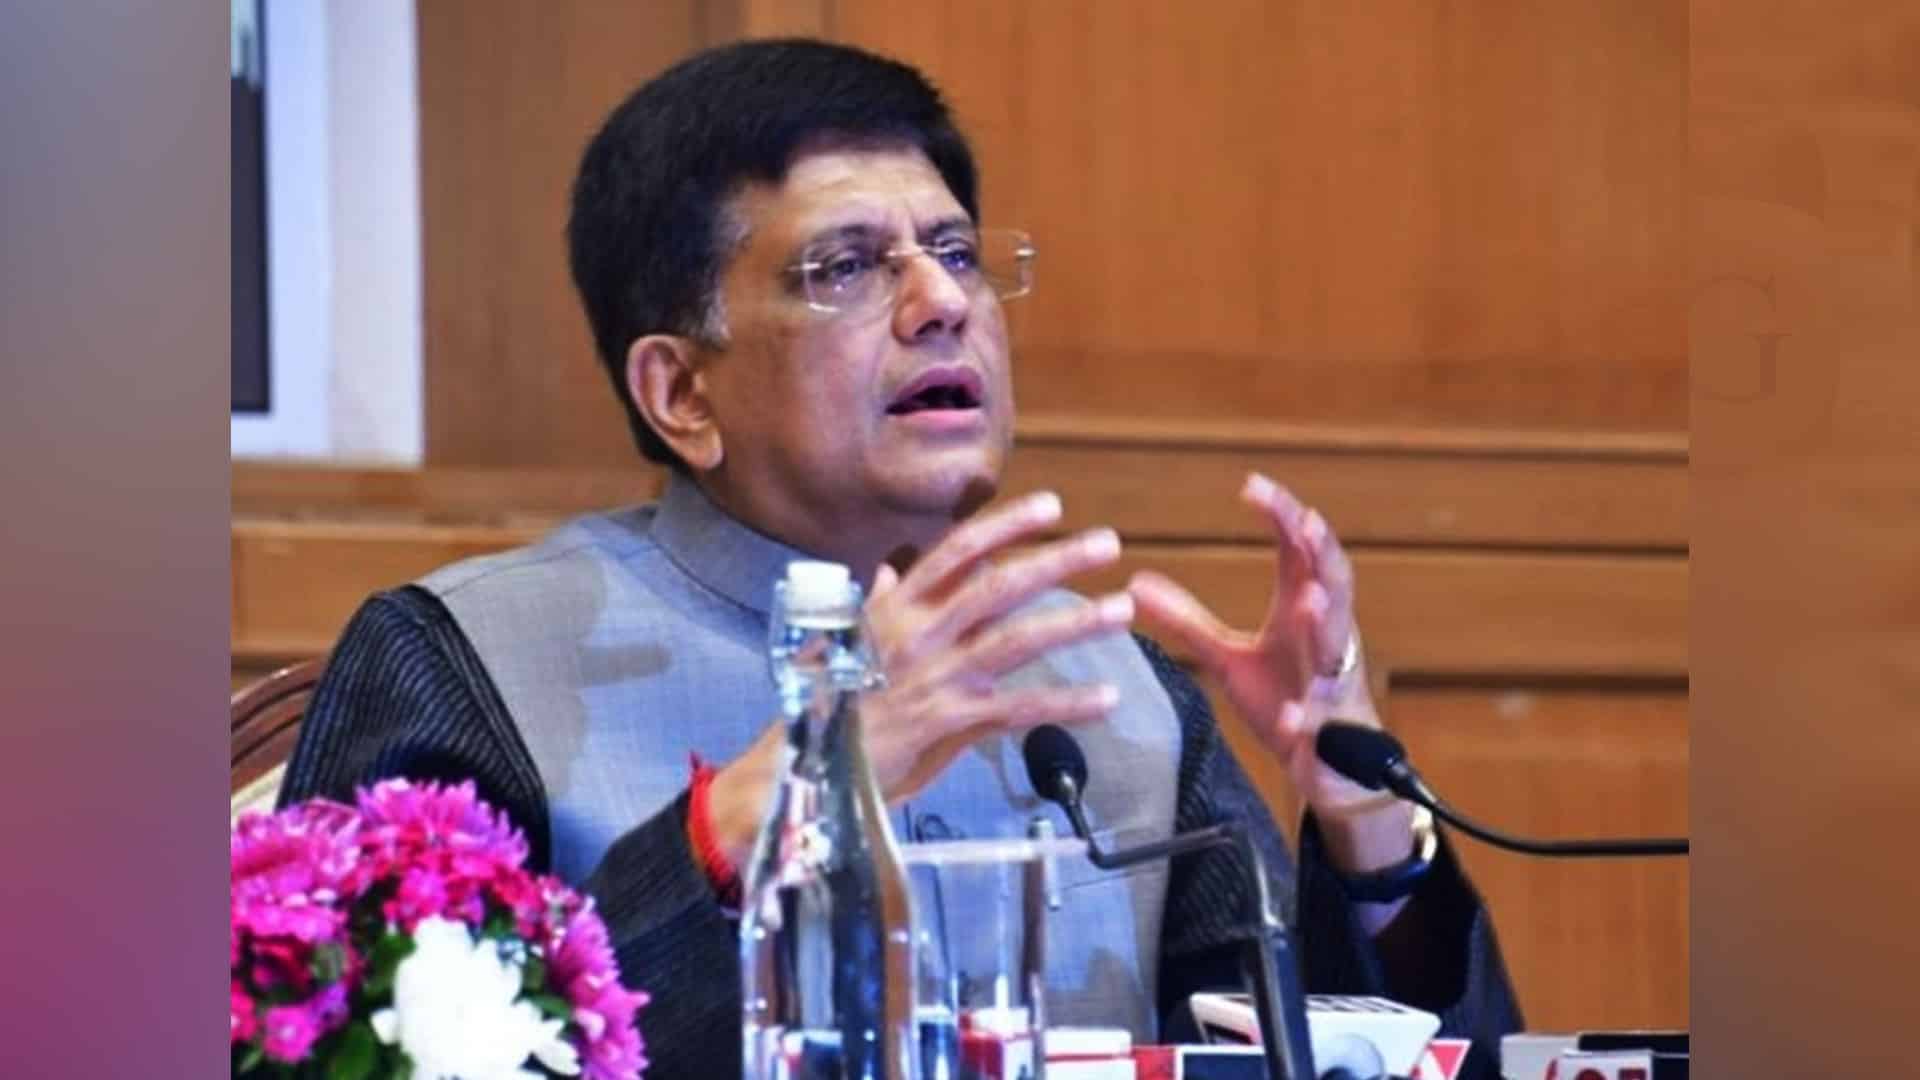 BRICS economies catching up with combined GDP of G7 countries: Piyush Goyal